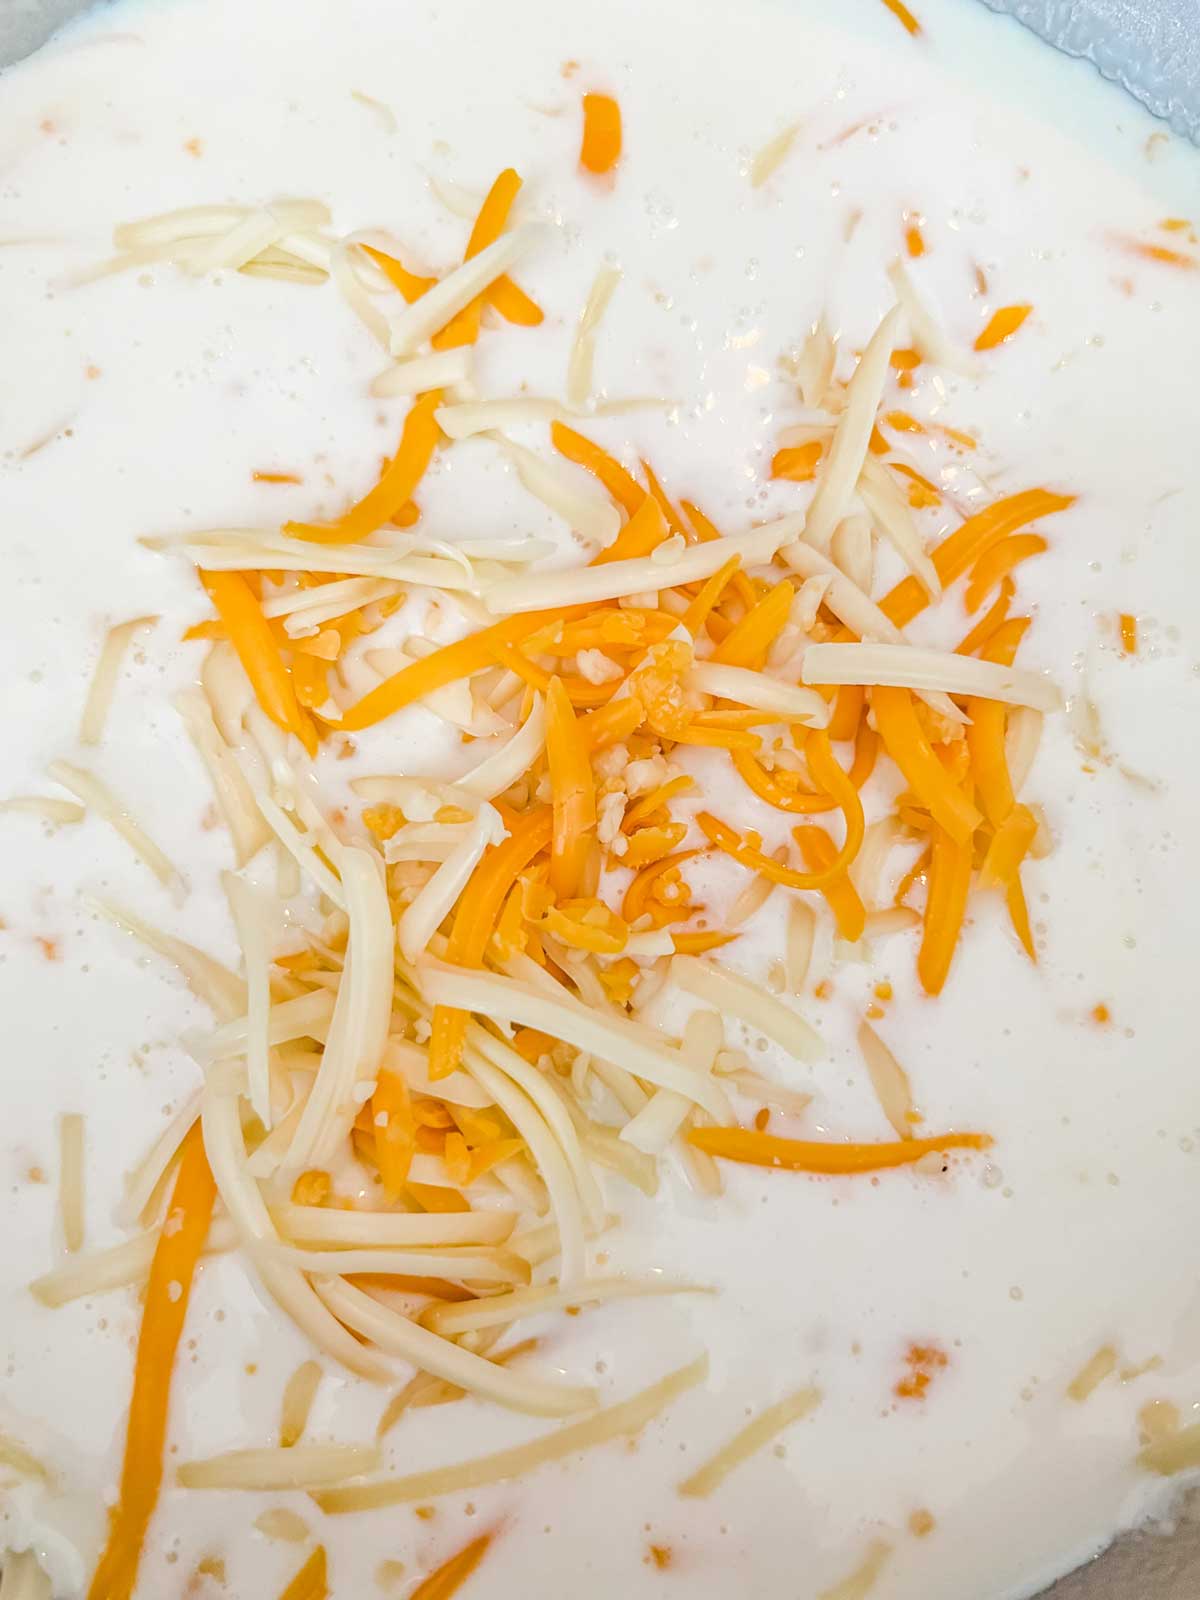 Cheese being added to a cream sauce in a pot.